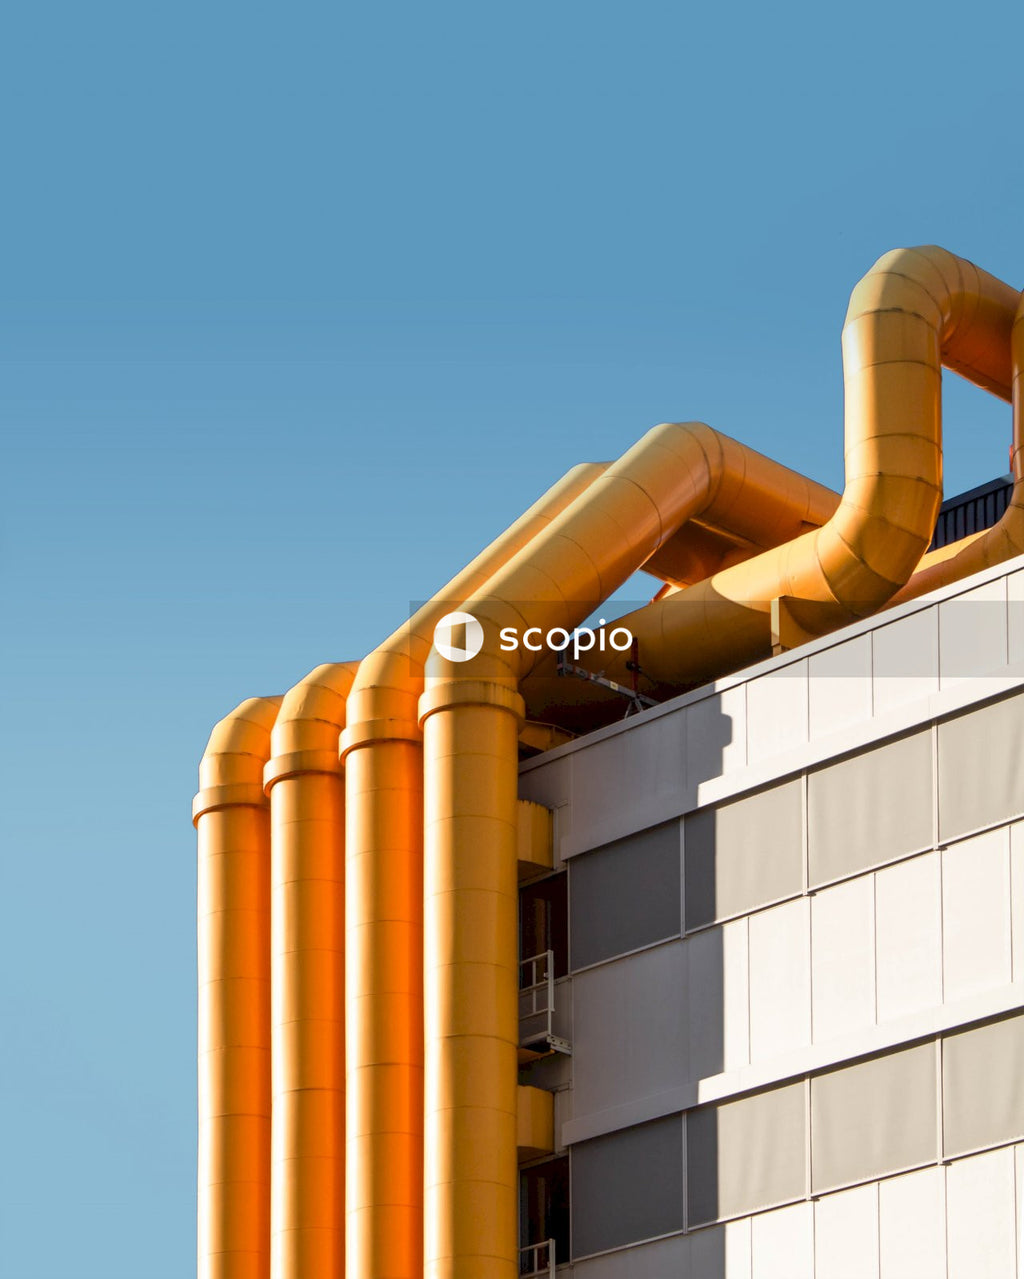 Four yellow pipes on white wall outdoor under blue sky